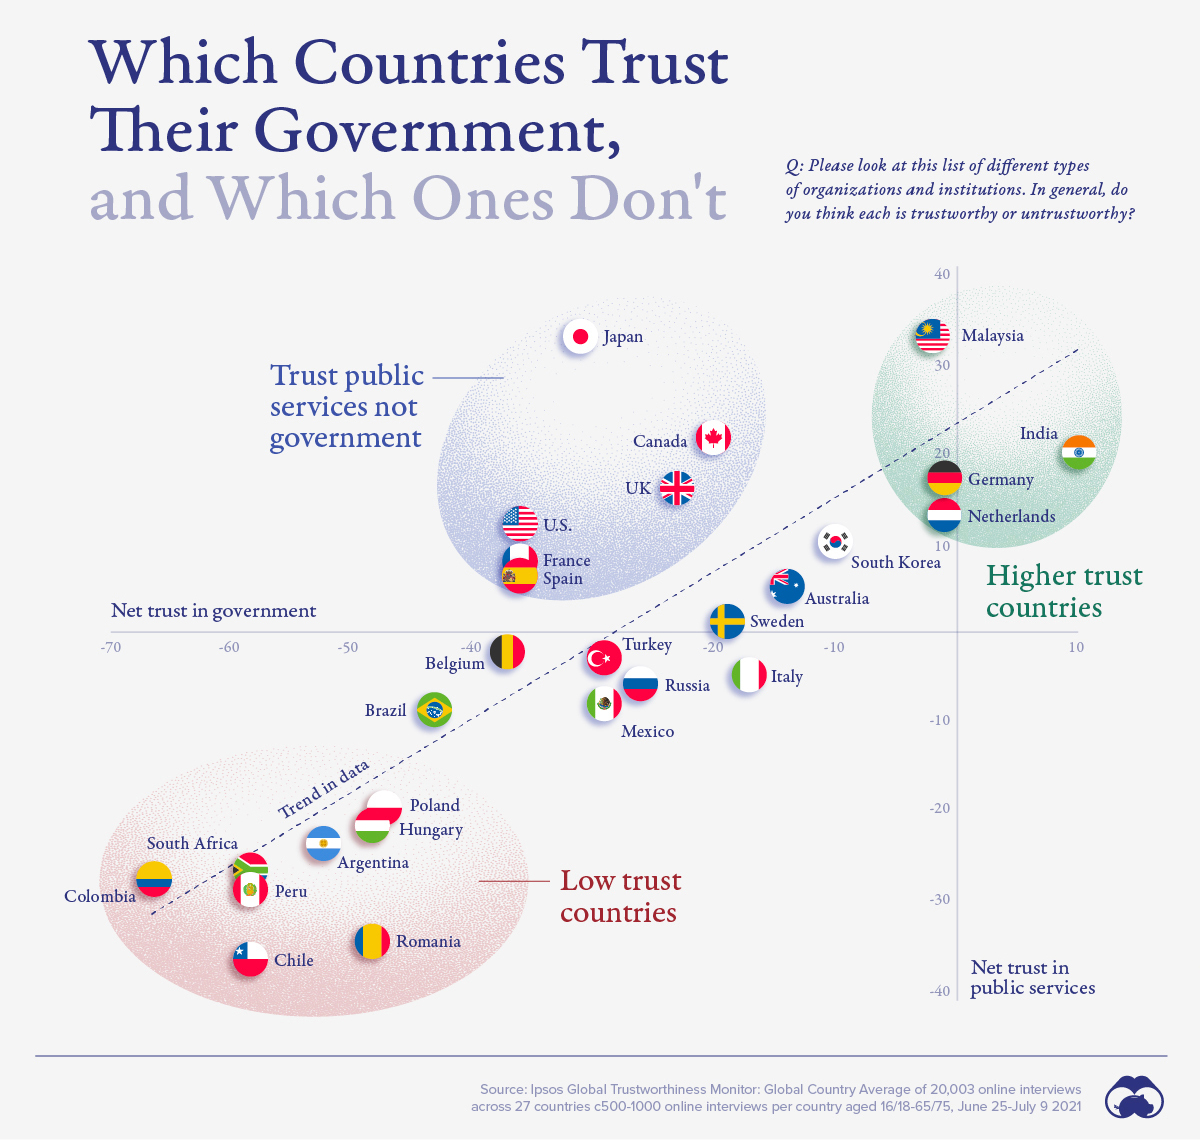 Which Countries Trust Their Government, and Which Ones Don’t?